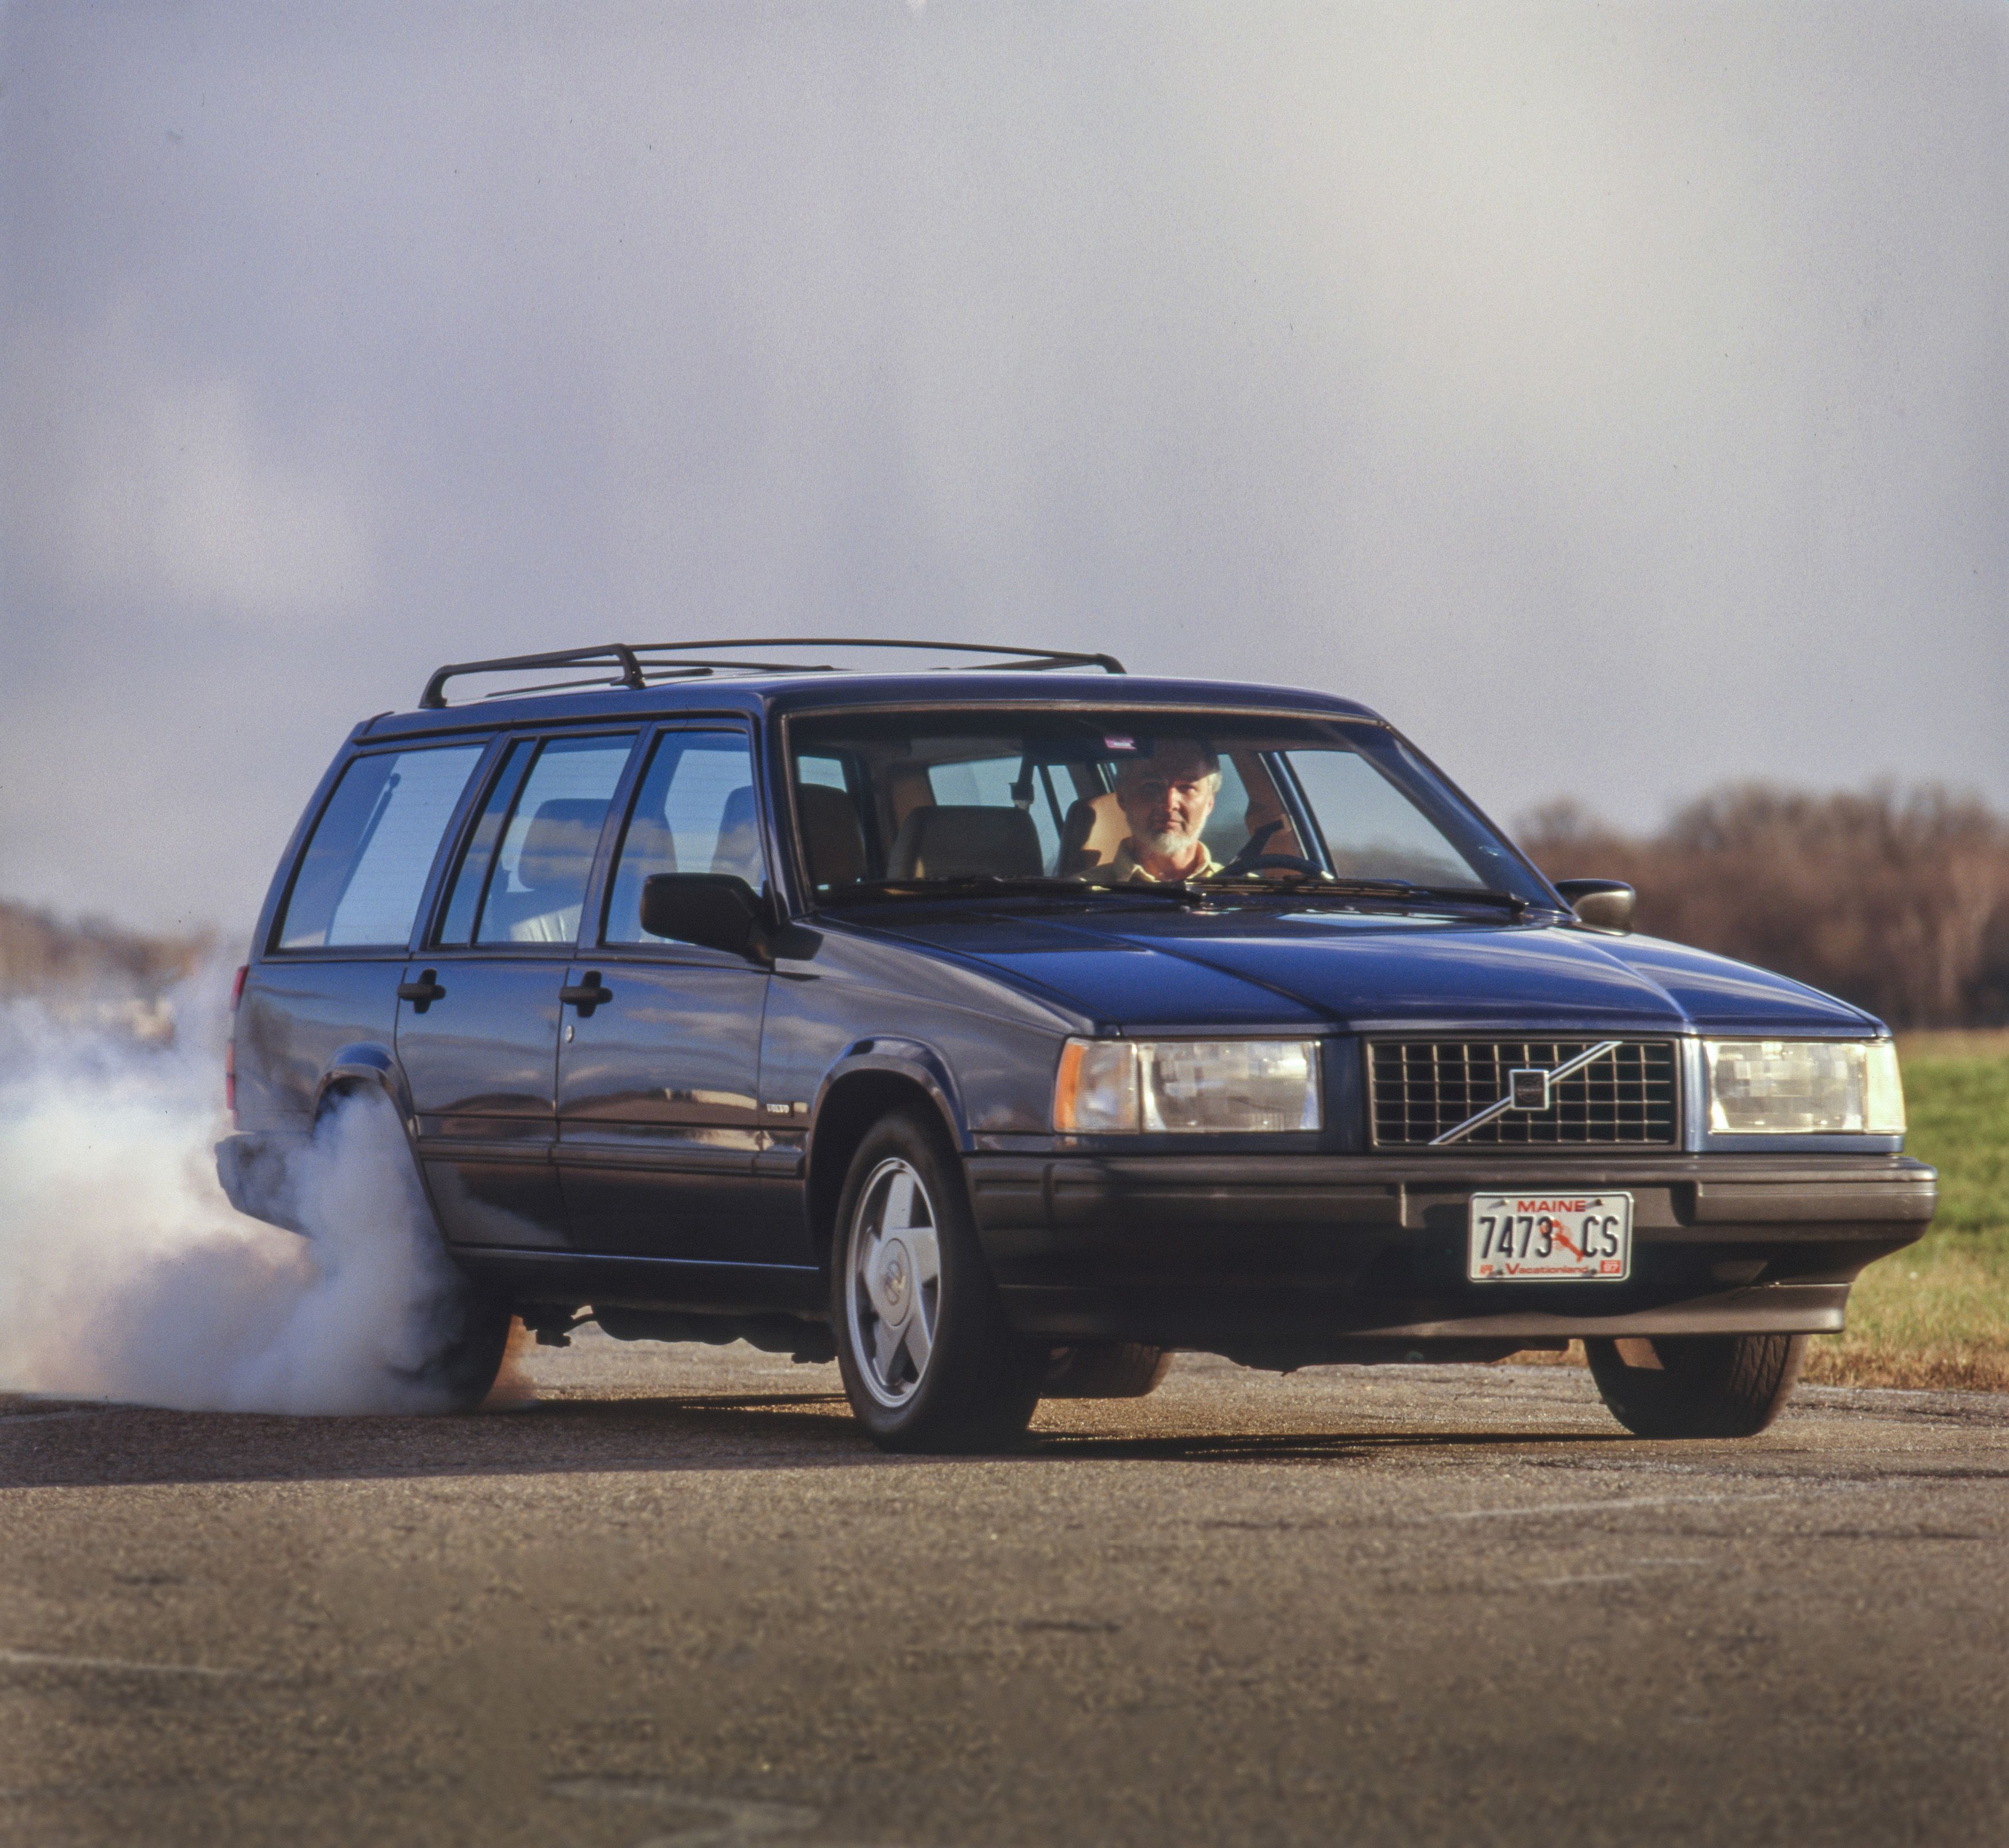 Tested: Old Volvo Wagons Are a V-8 Swap from Serious Speed